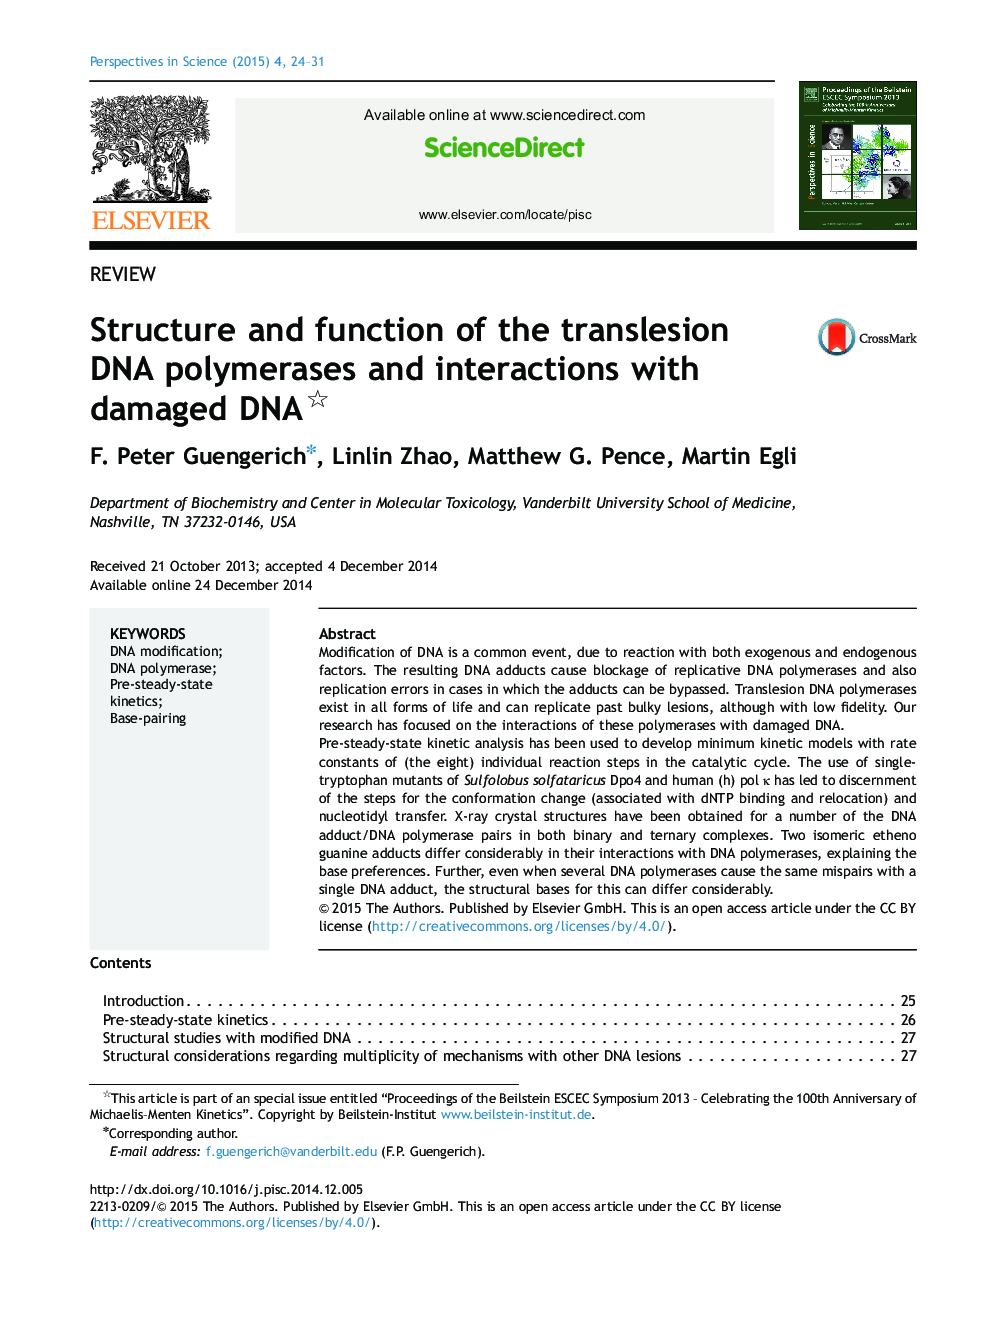 Structure and function of the translesion DNA polymerases and interactions with damaged DNA 